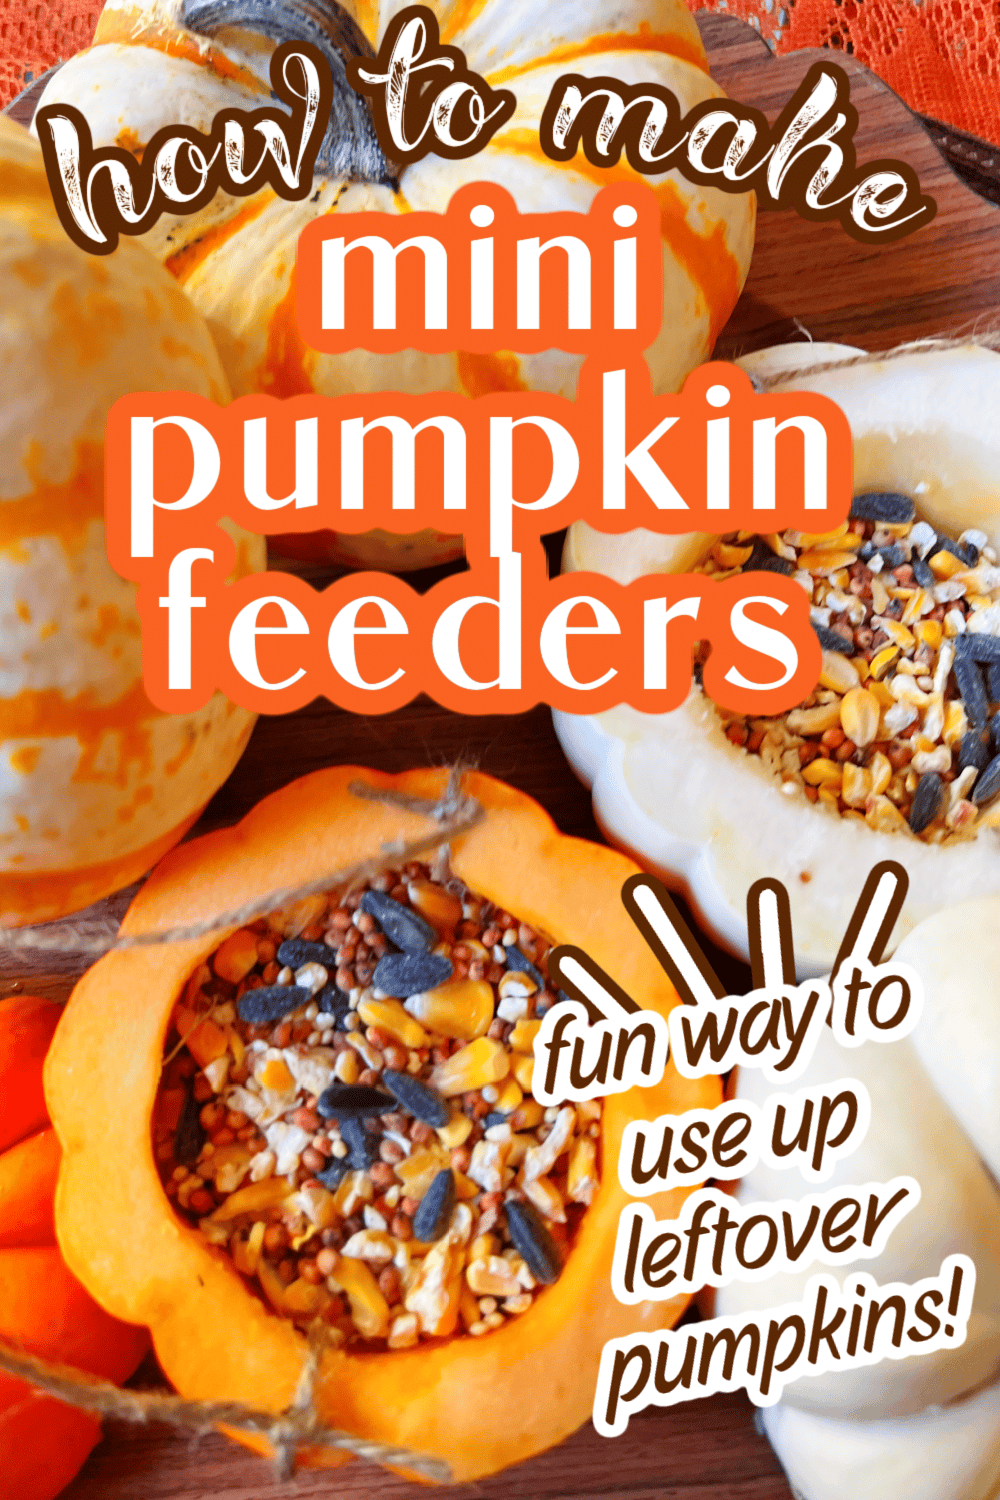 MINI DIY PUMPKIN BIRD FEEDER - Ideas for what to do with your leftover Halloween pumpkins or Thanksgiving pumpkin decorations - text over images of mini DIY pumpkin bird feeder crafts